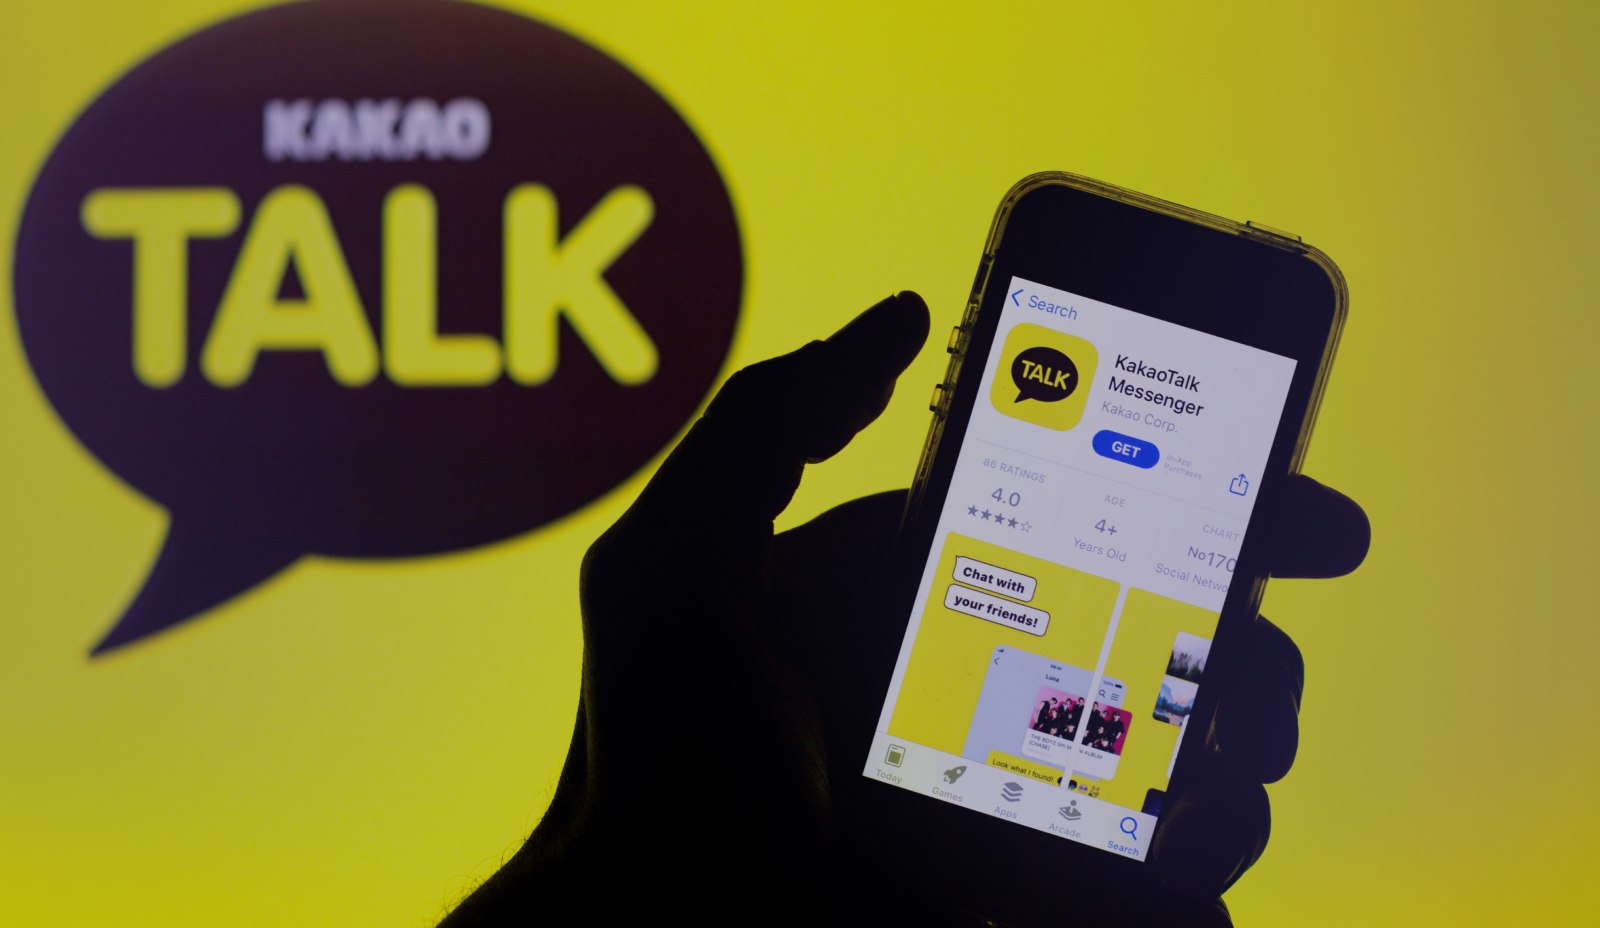 Experience Our Free KakaoTalk Voice Changer Today!